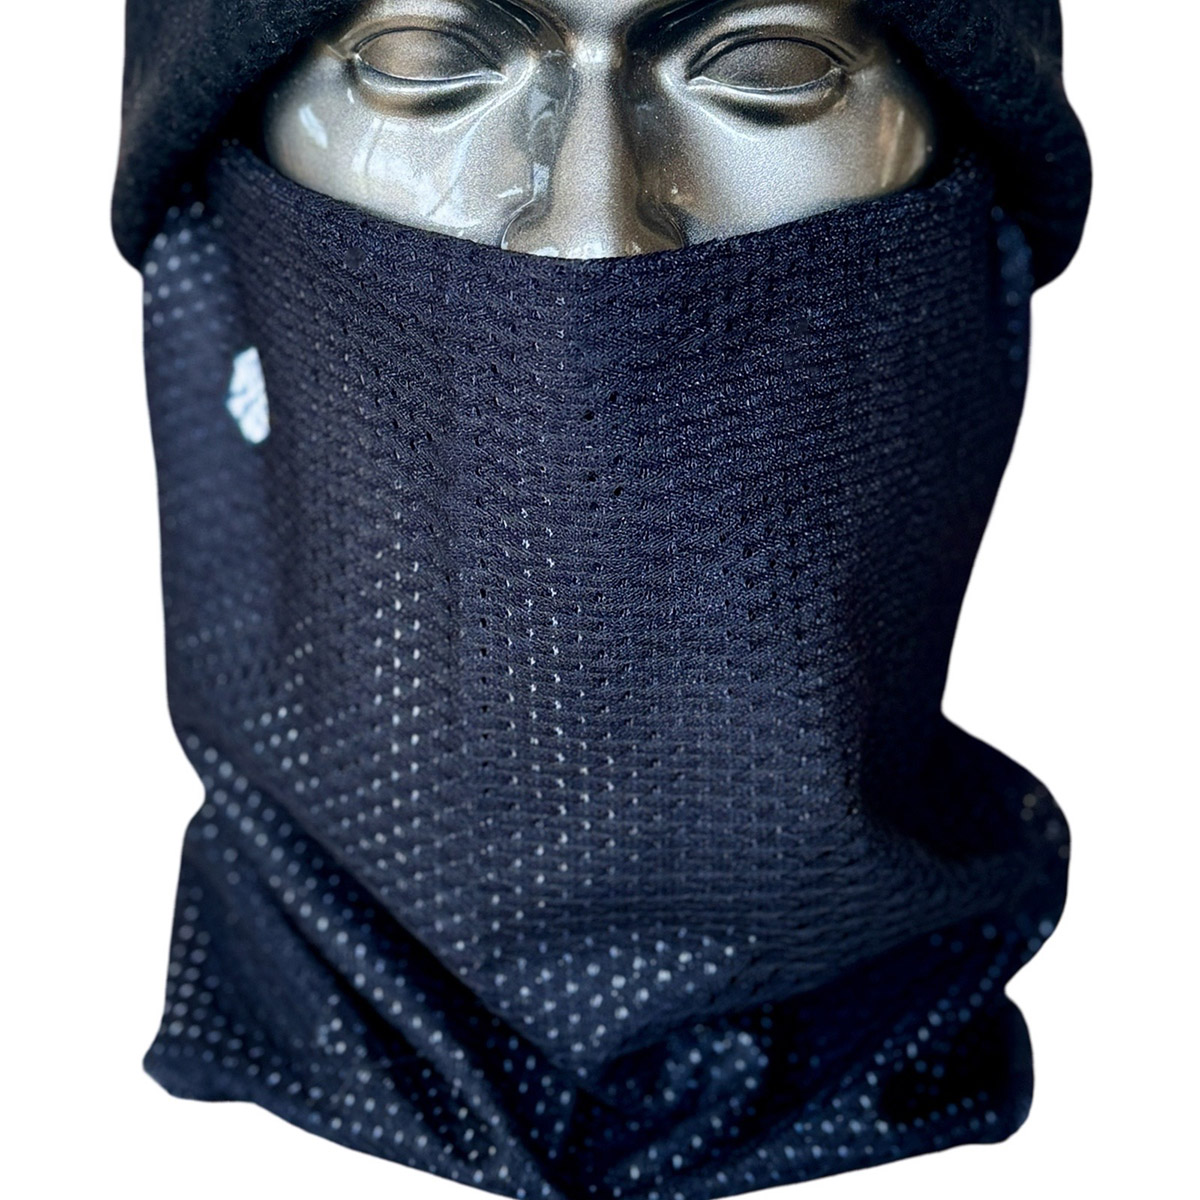 AVALON7 breathable black mesh neckgaiter for snowboarding, skiing and sun protection